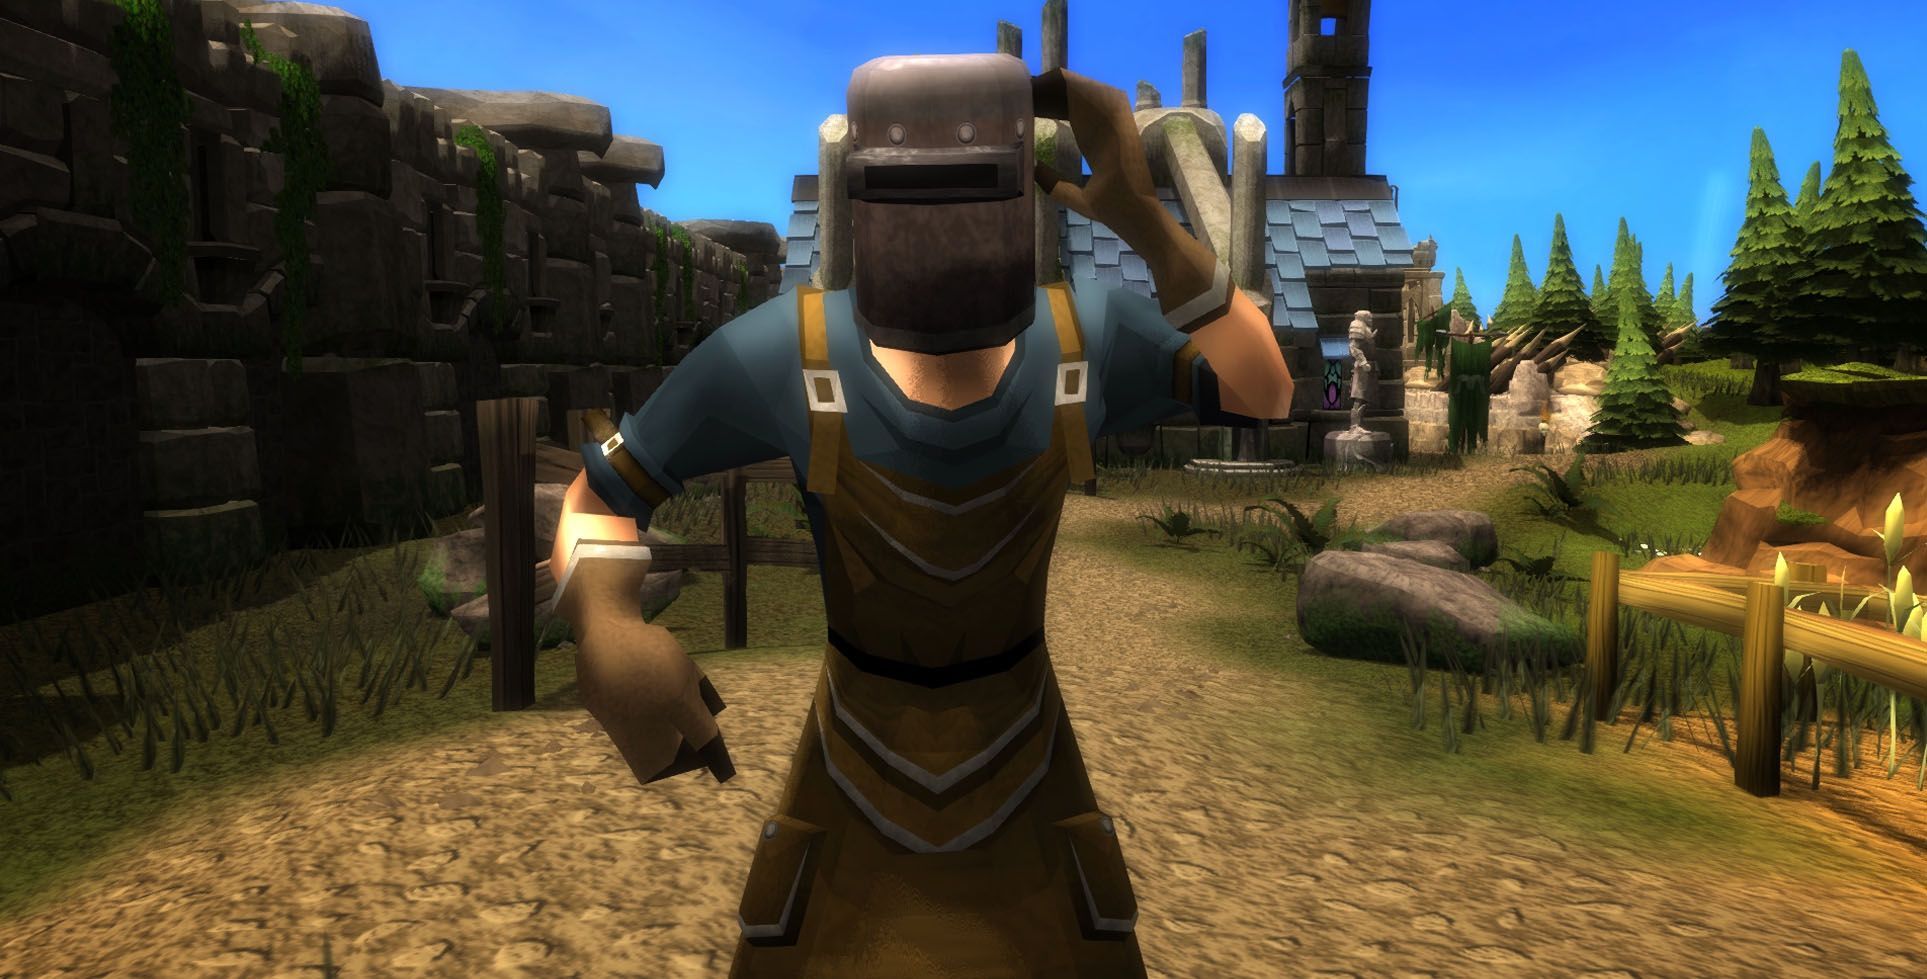 Old School RuneScape Announces New Fresh Start Worlds Opening This Month 